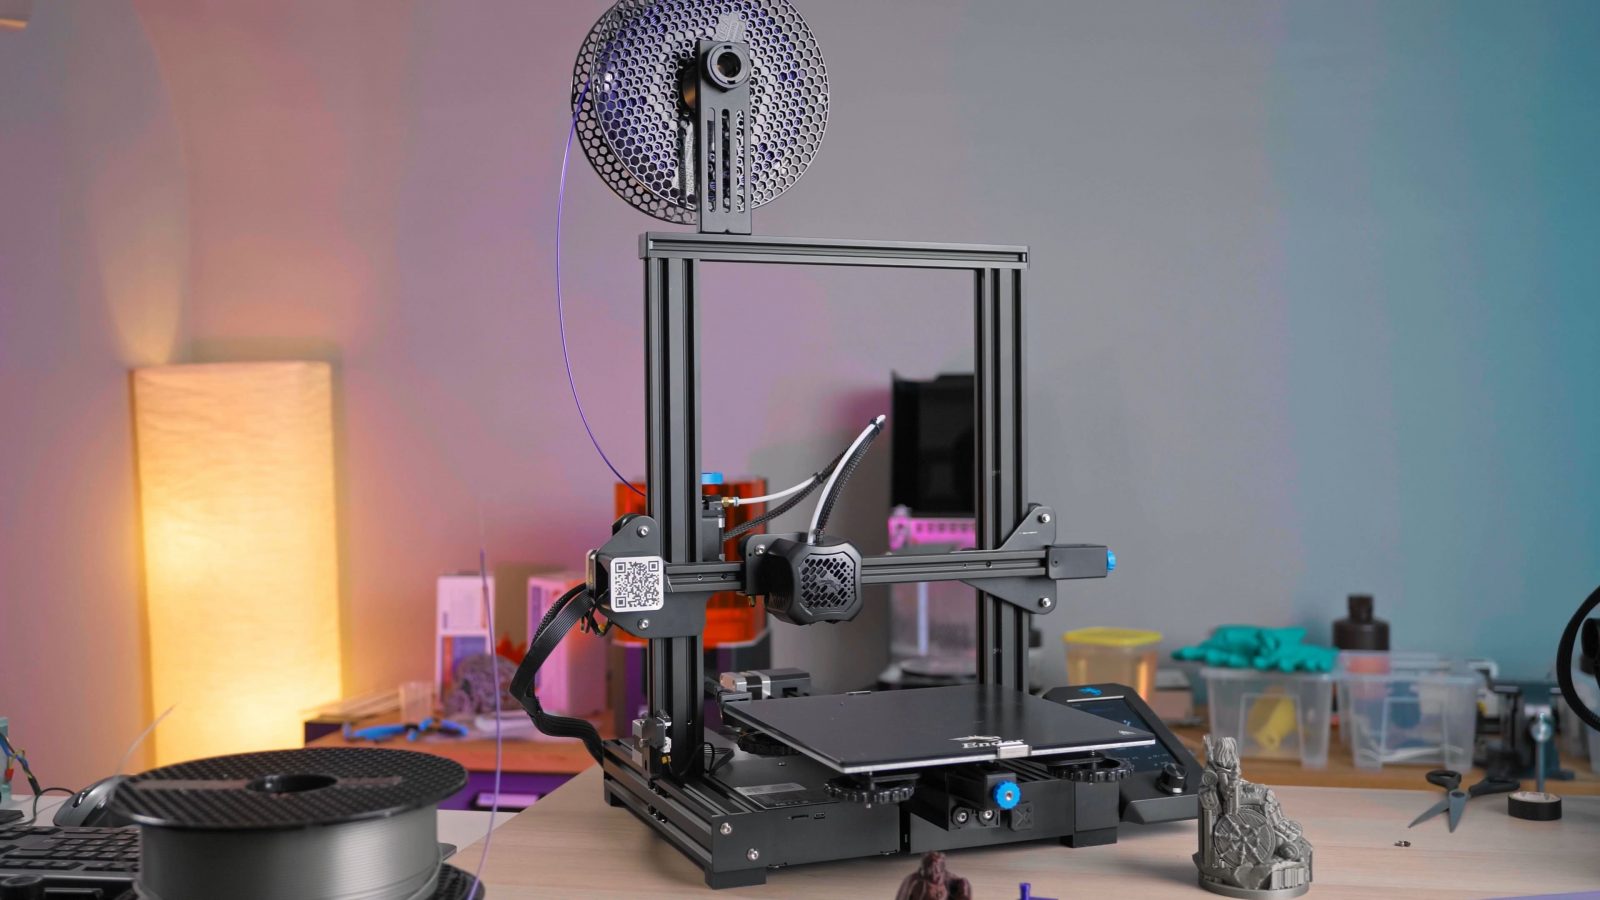 Apparently the ender 3 v3 se isn't the same as the ender 3 v3, that is  releasing soon. : r/Creality